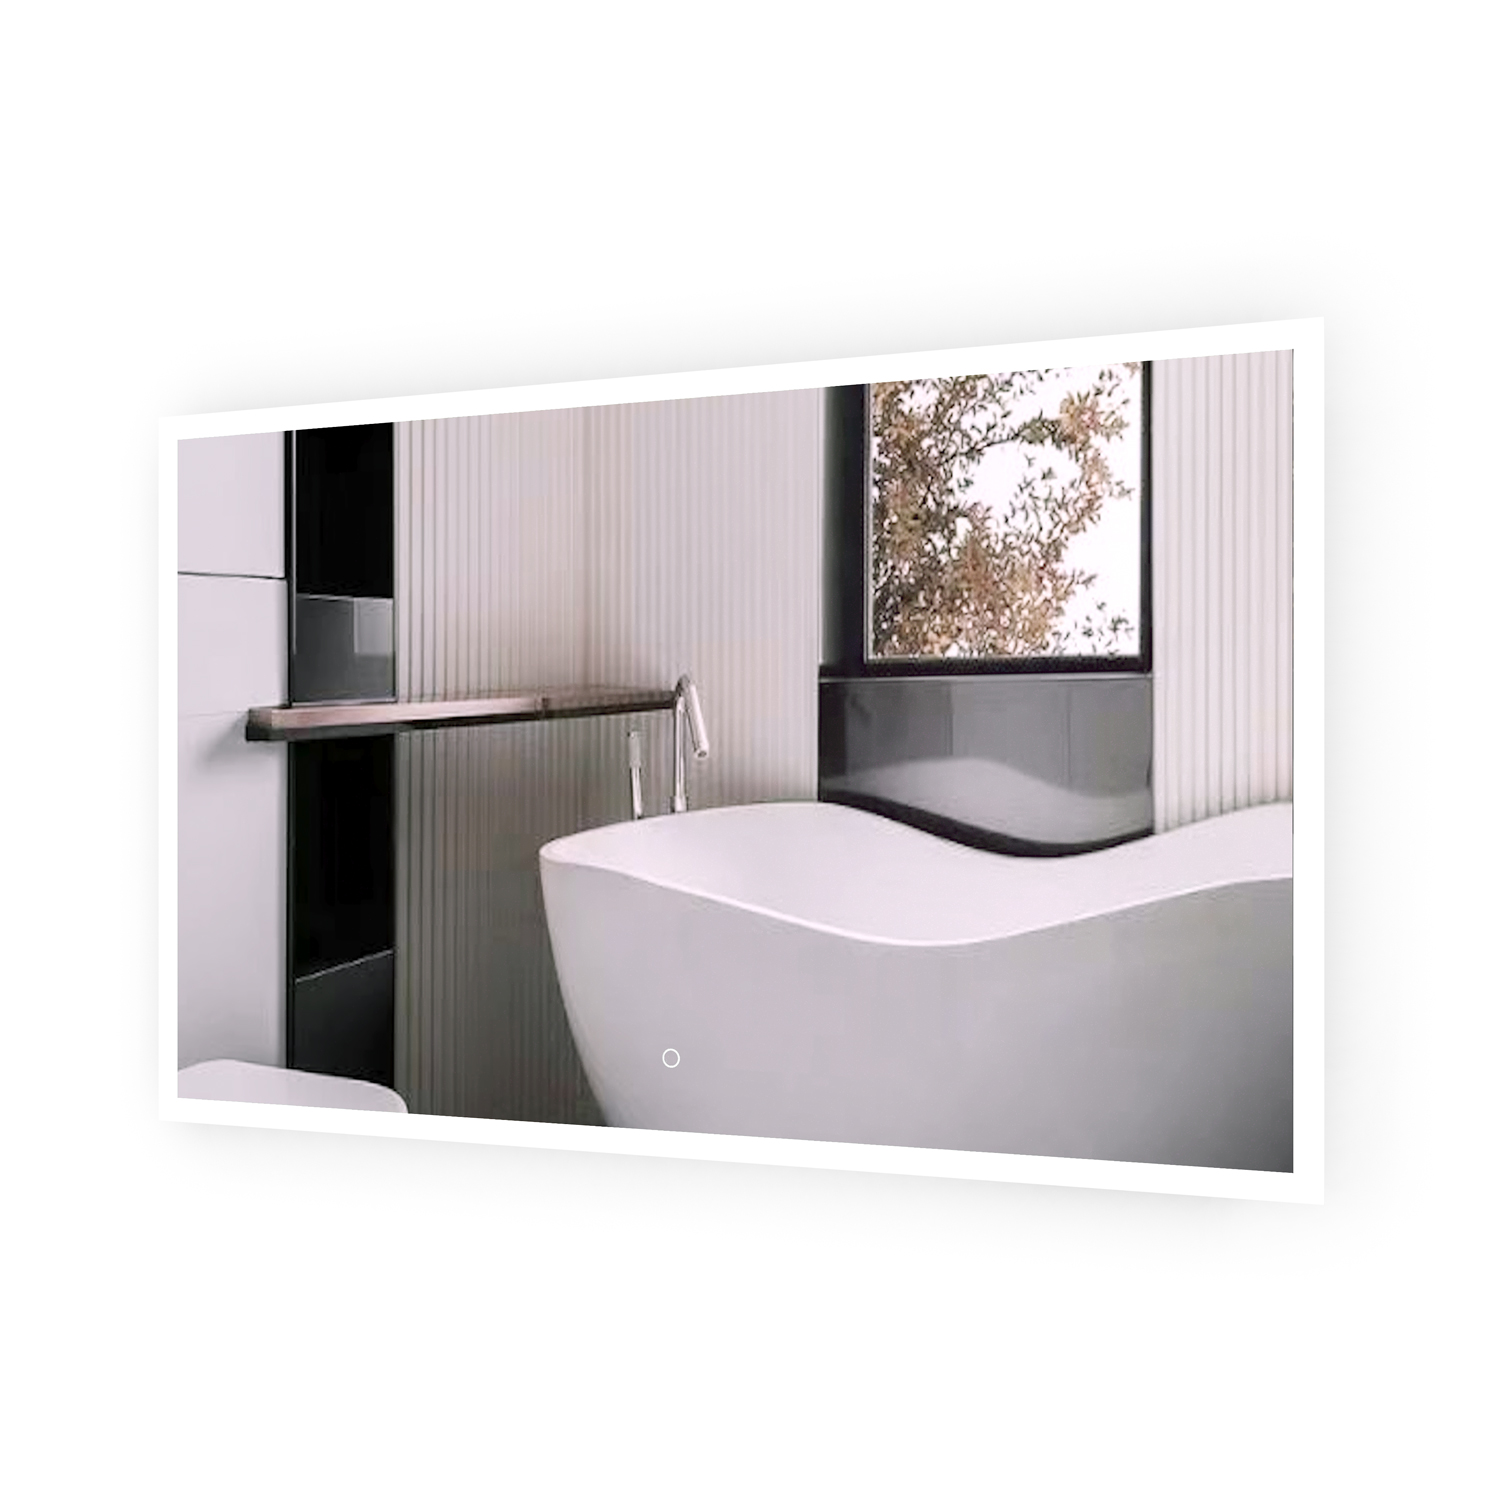 Duko MA034830T Wall Mounted Makeup LED Bathroom Vanity Mirror with Anti-Fog and Bluetooth Options